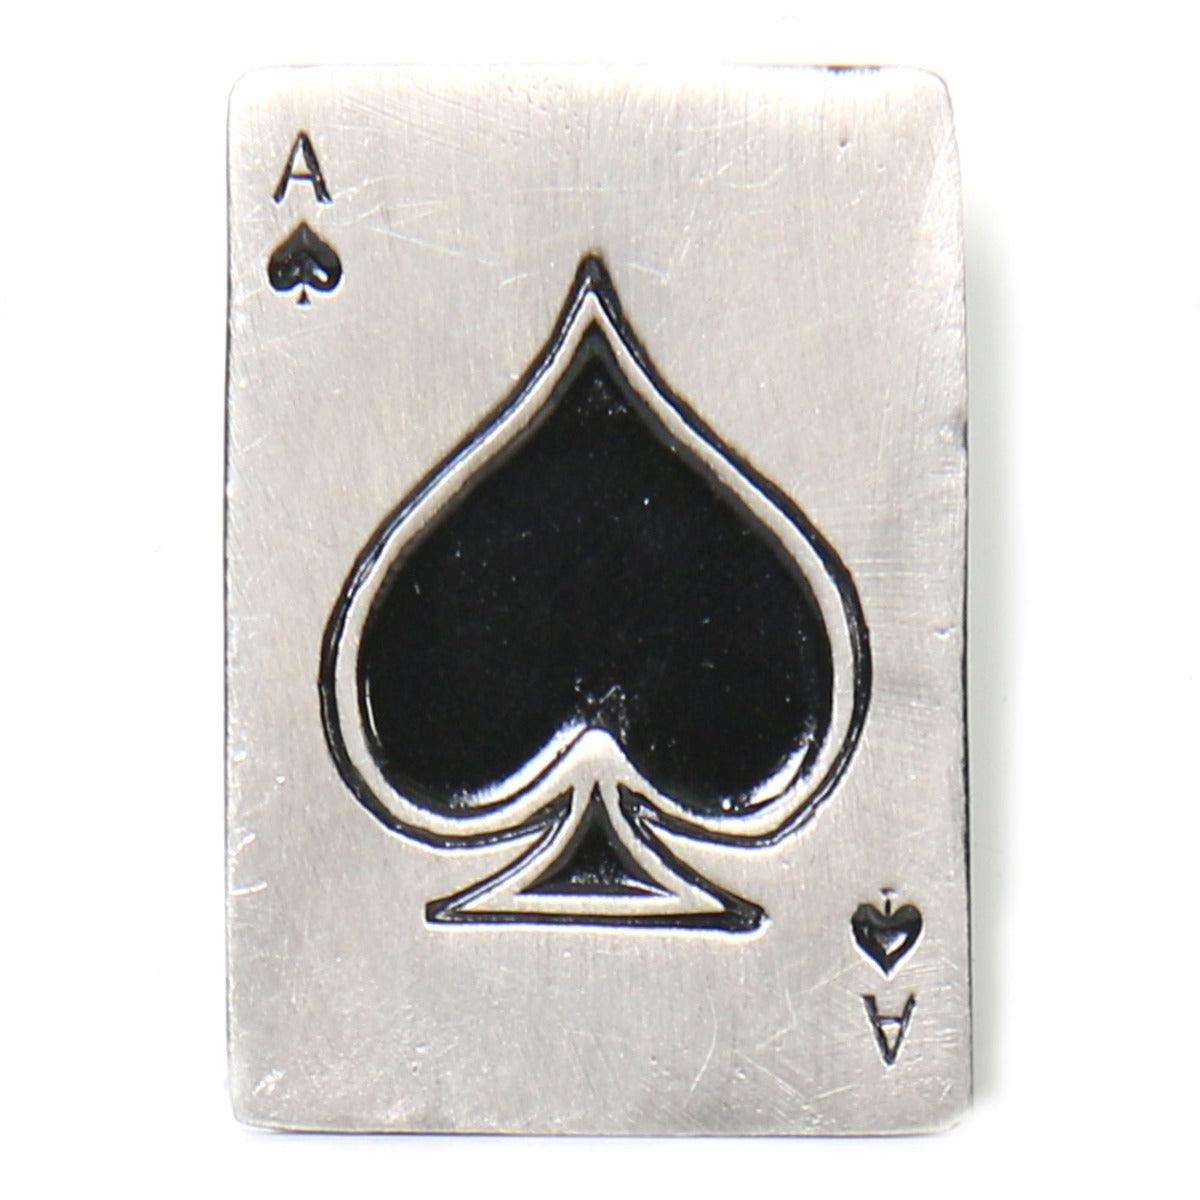 Hot Leathers Ace Of Spades Pin - American Legend Rider